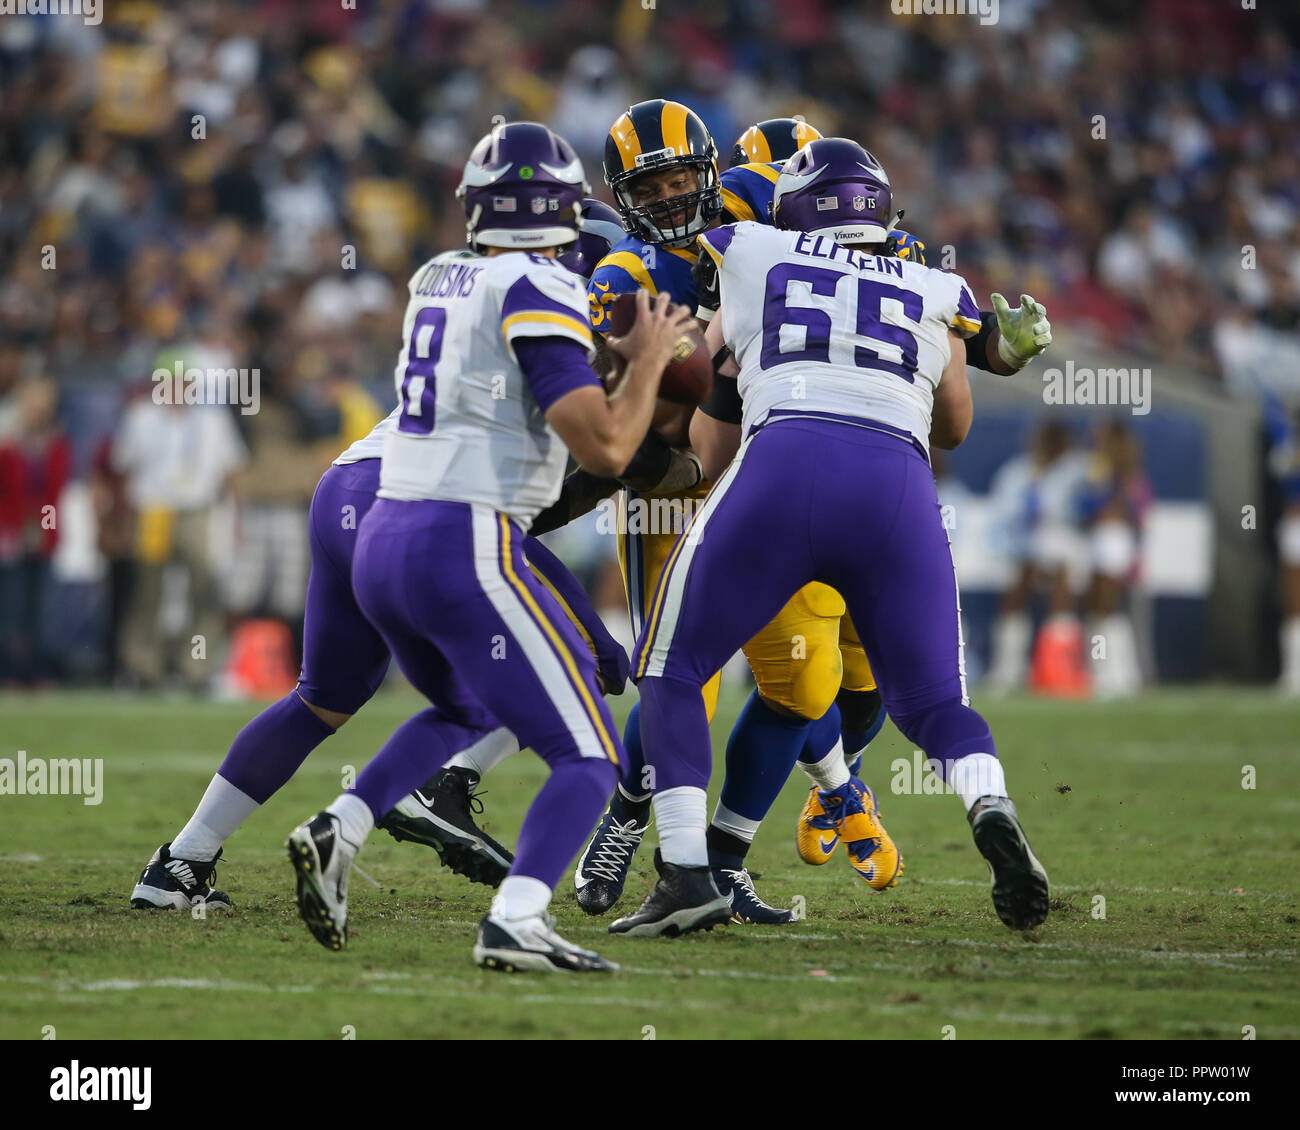 Los Angeles, CA, USA. 27th Sep, 2018. Los Angeles Rams defensive tackle Ndamukong Suh (93) eyeing Kirk Cousins during the NFL Minnesota Vikings vs Los Angeles Rams at the Los Angeles Memorial Coliseum in Los Angeles, Ca on September 27, 2018. Jevone Moore Credit: csm/Alamy Live News Stock Photo